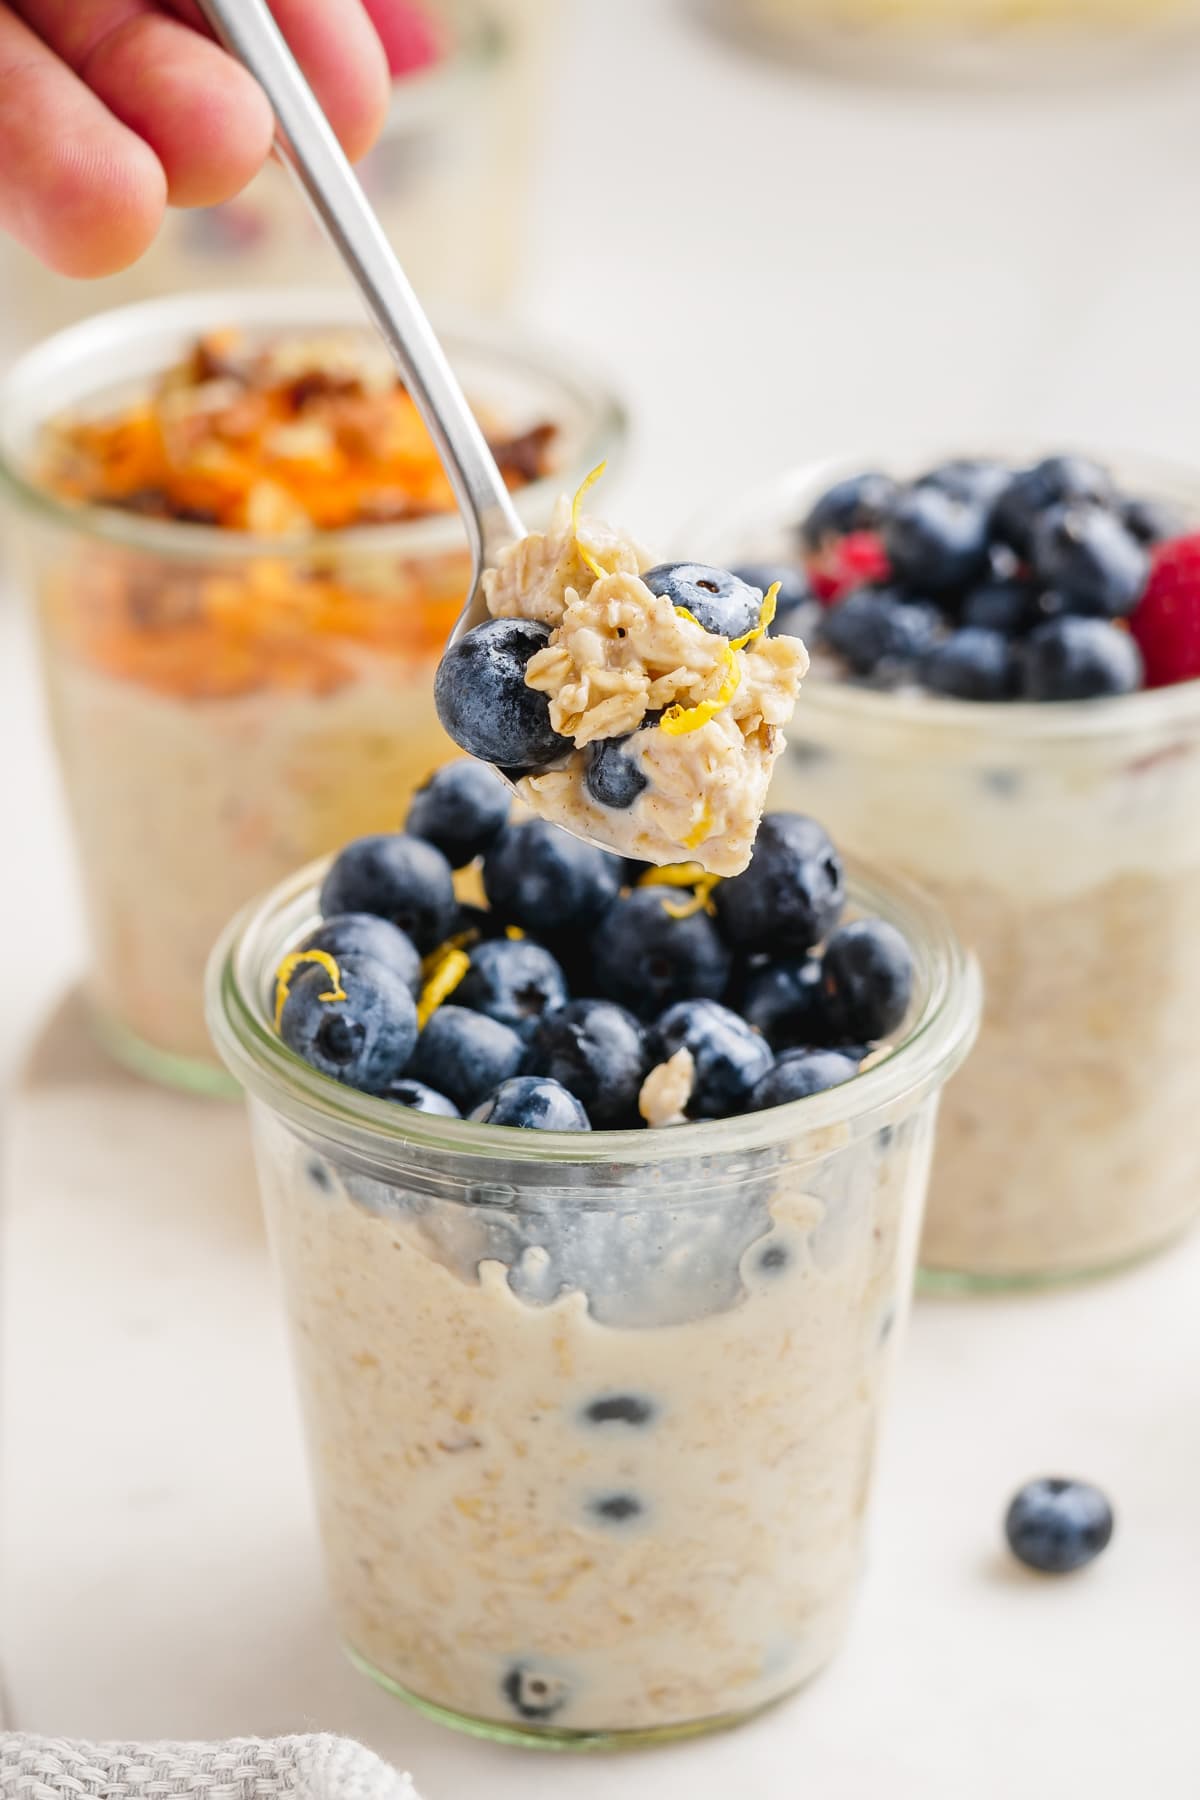 spooning out overnight oats from jar